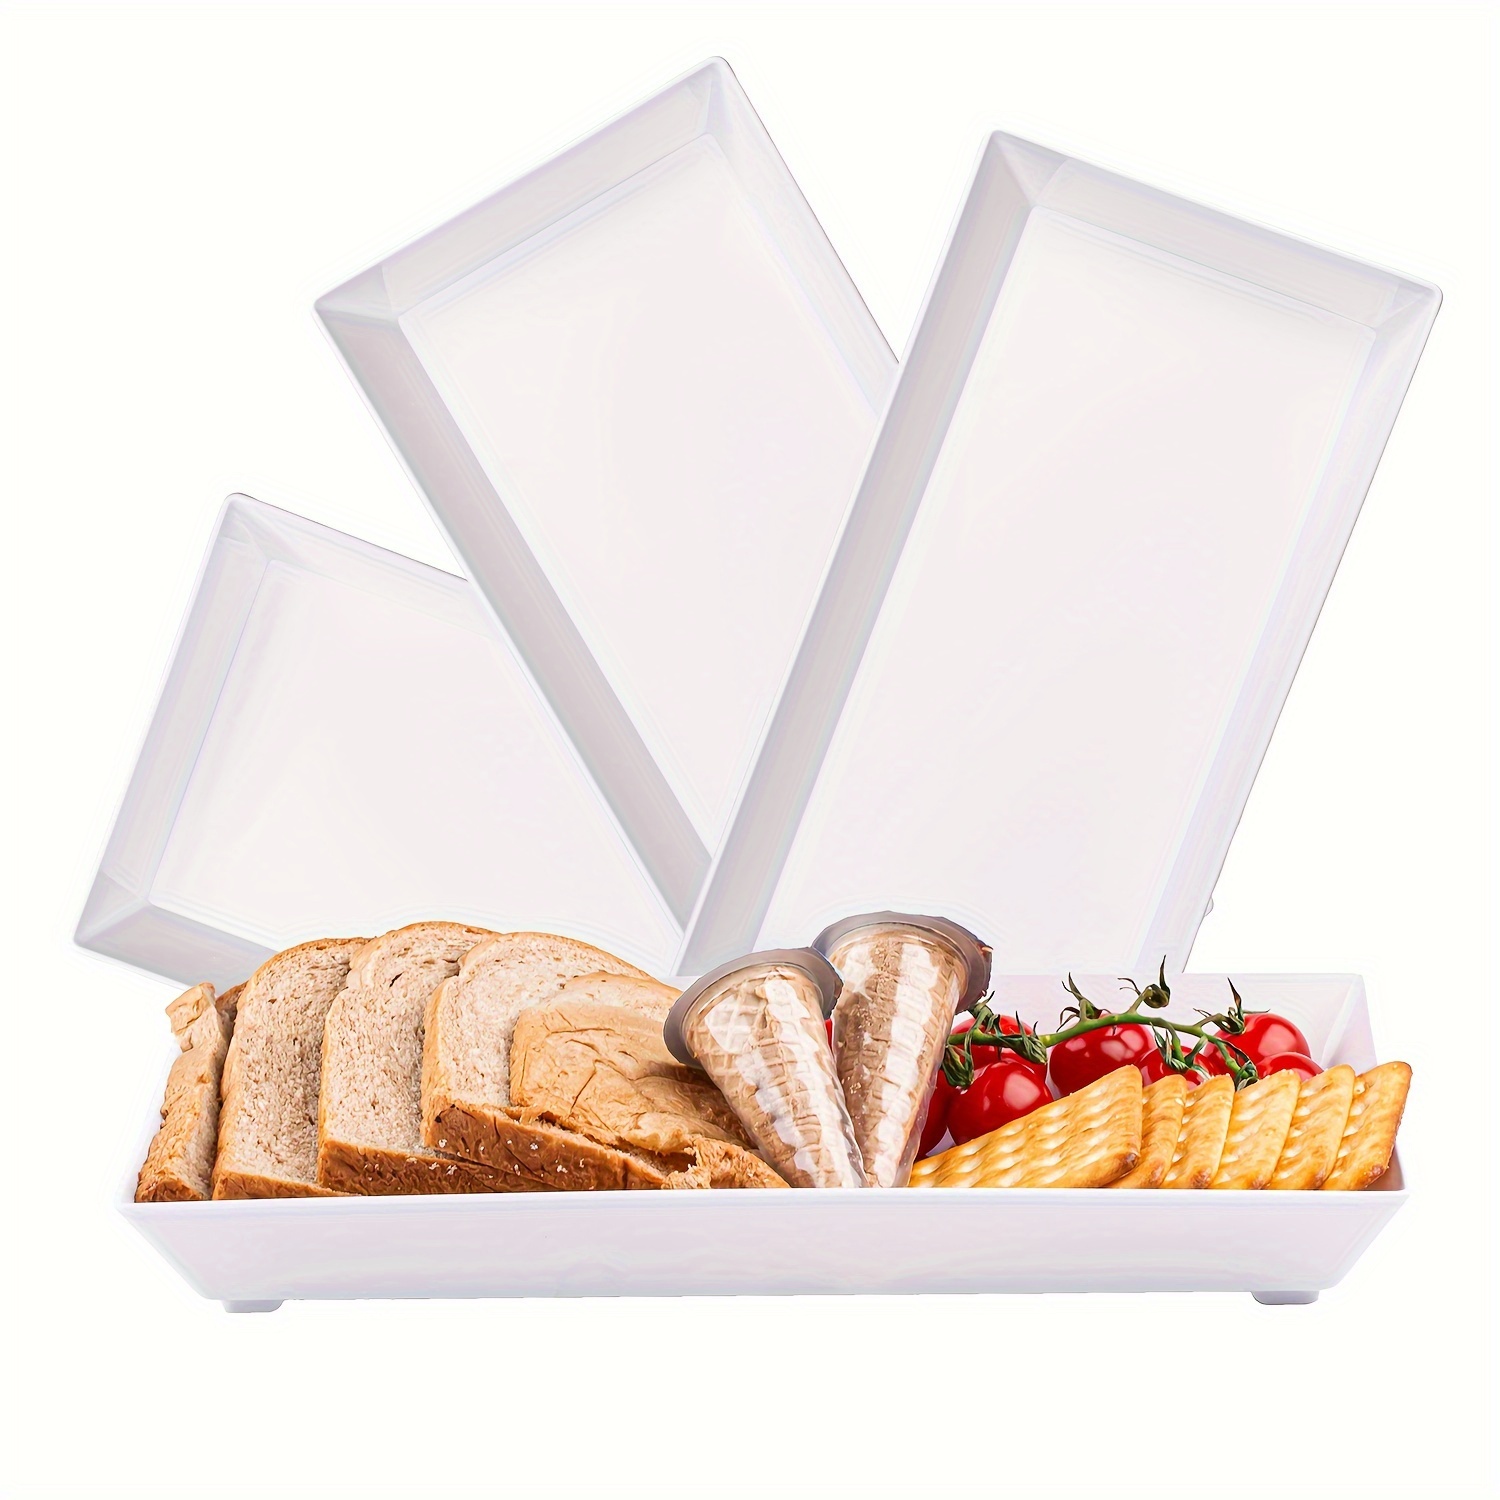 

4-pack Rectangle Plastic Dinner Plates - Durable Serving Trays For Party, Kitchen & Restaurant Use - Multi-purpose Food Storage Organizers - Reusable Snack, Fruit, Dessert, And Appetizer Platters